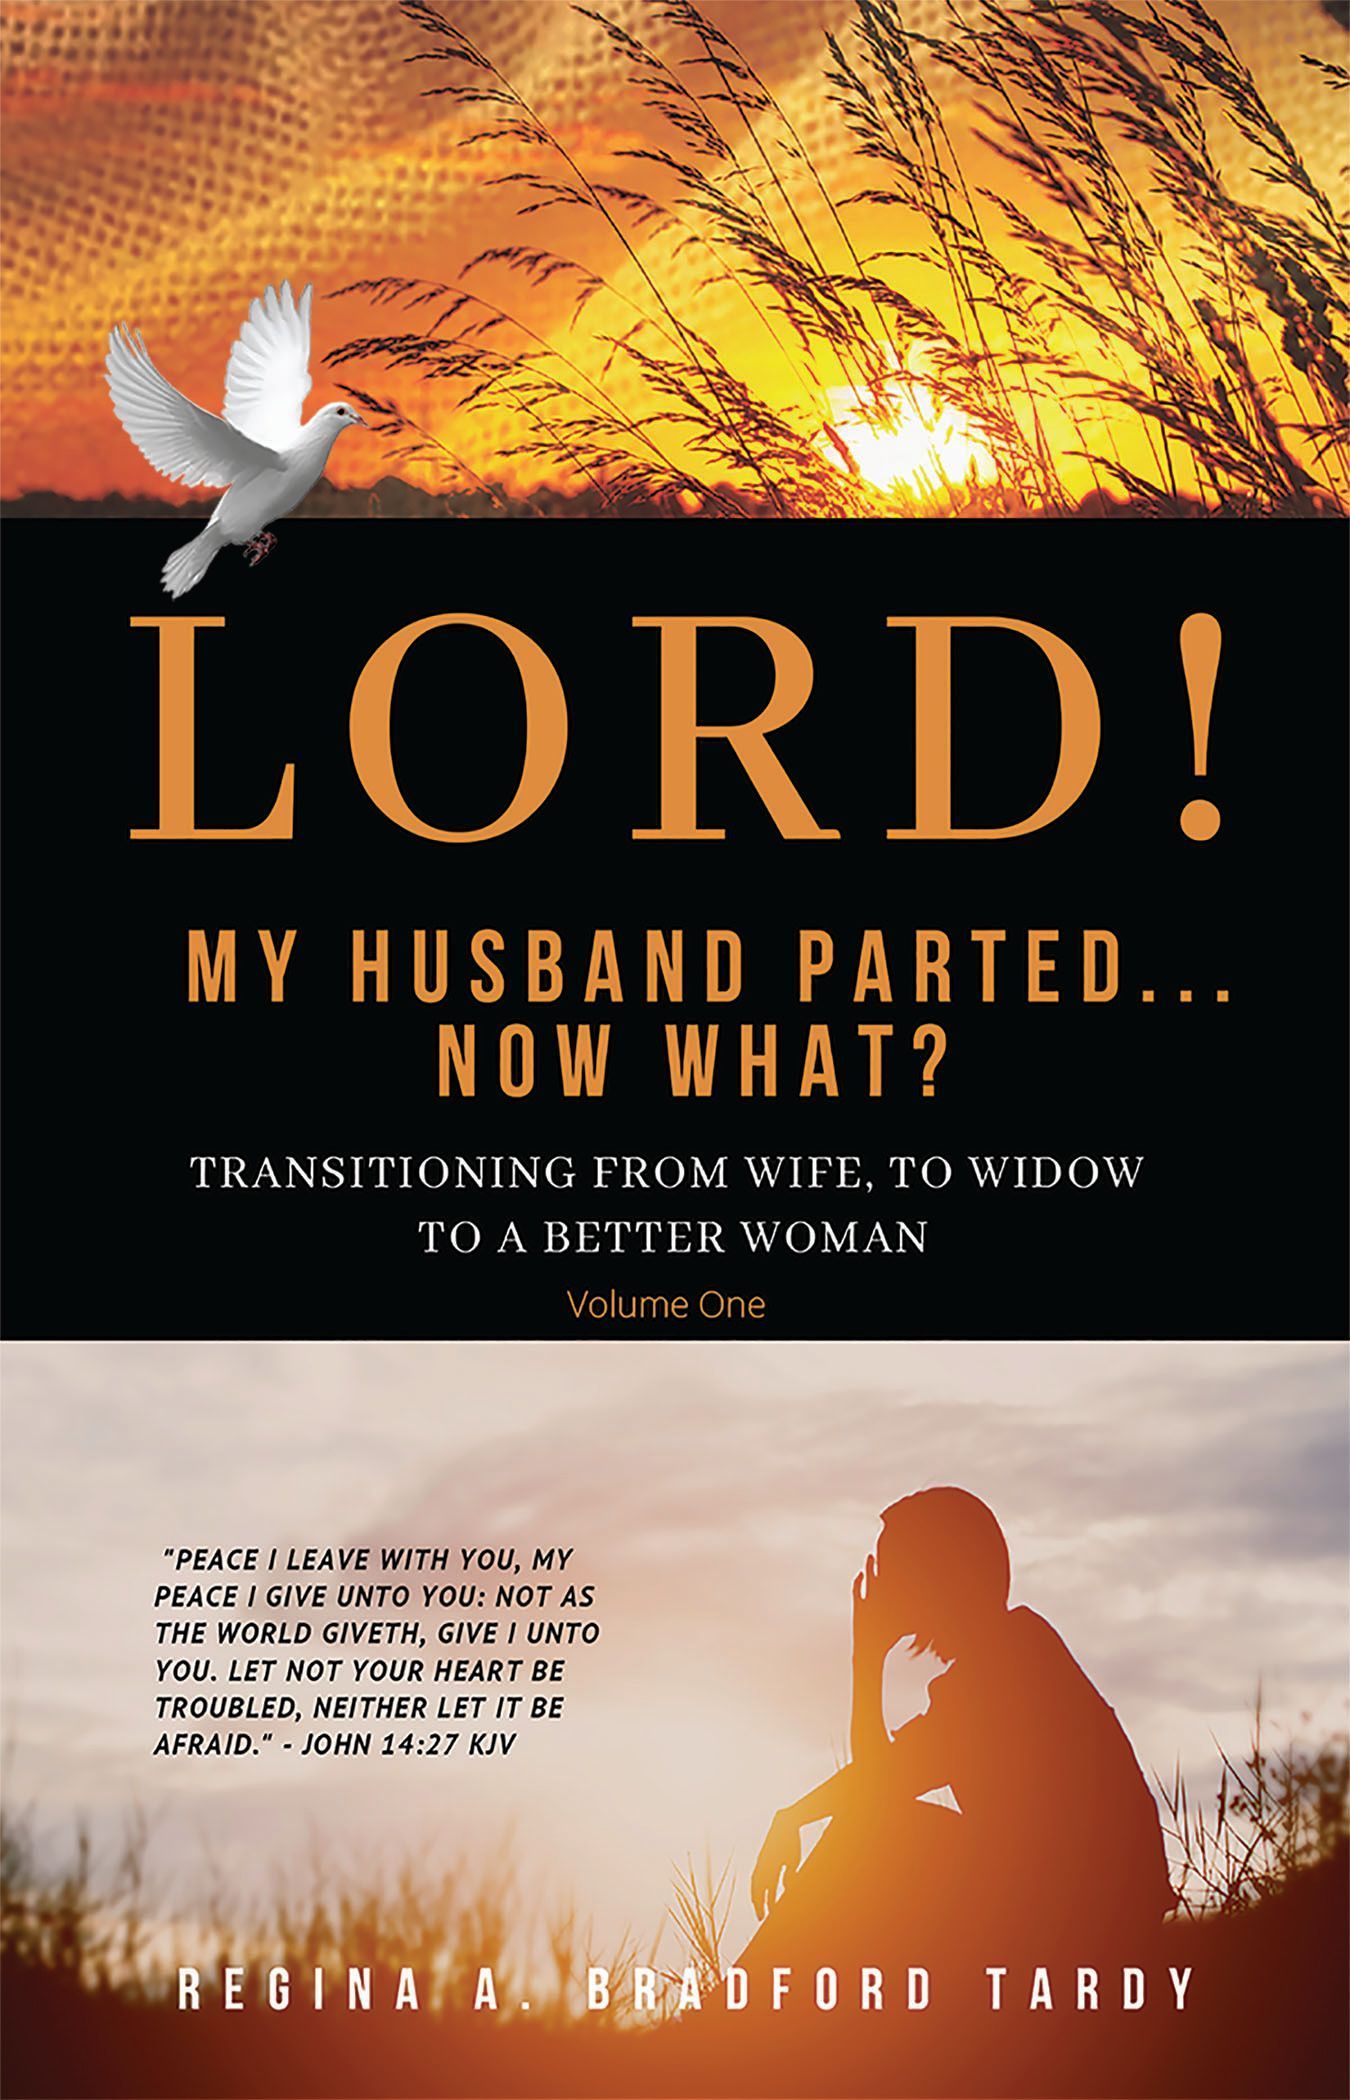 LORD! My Husband Parted..Now What?